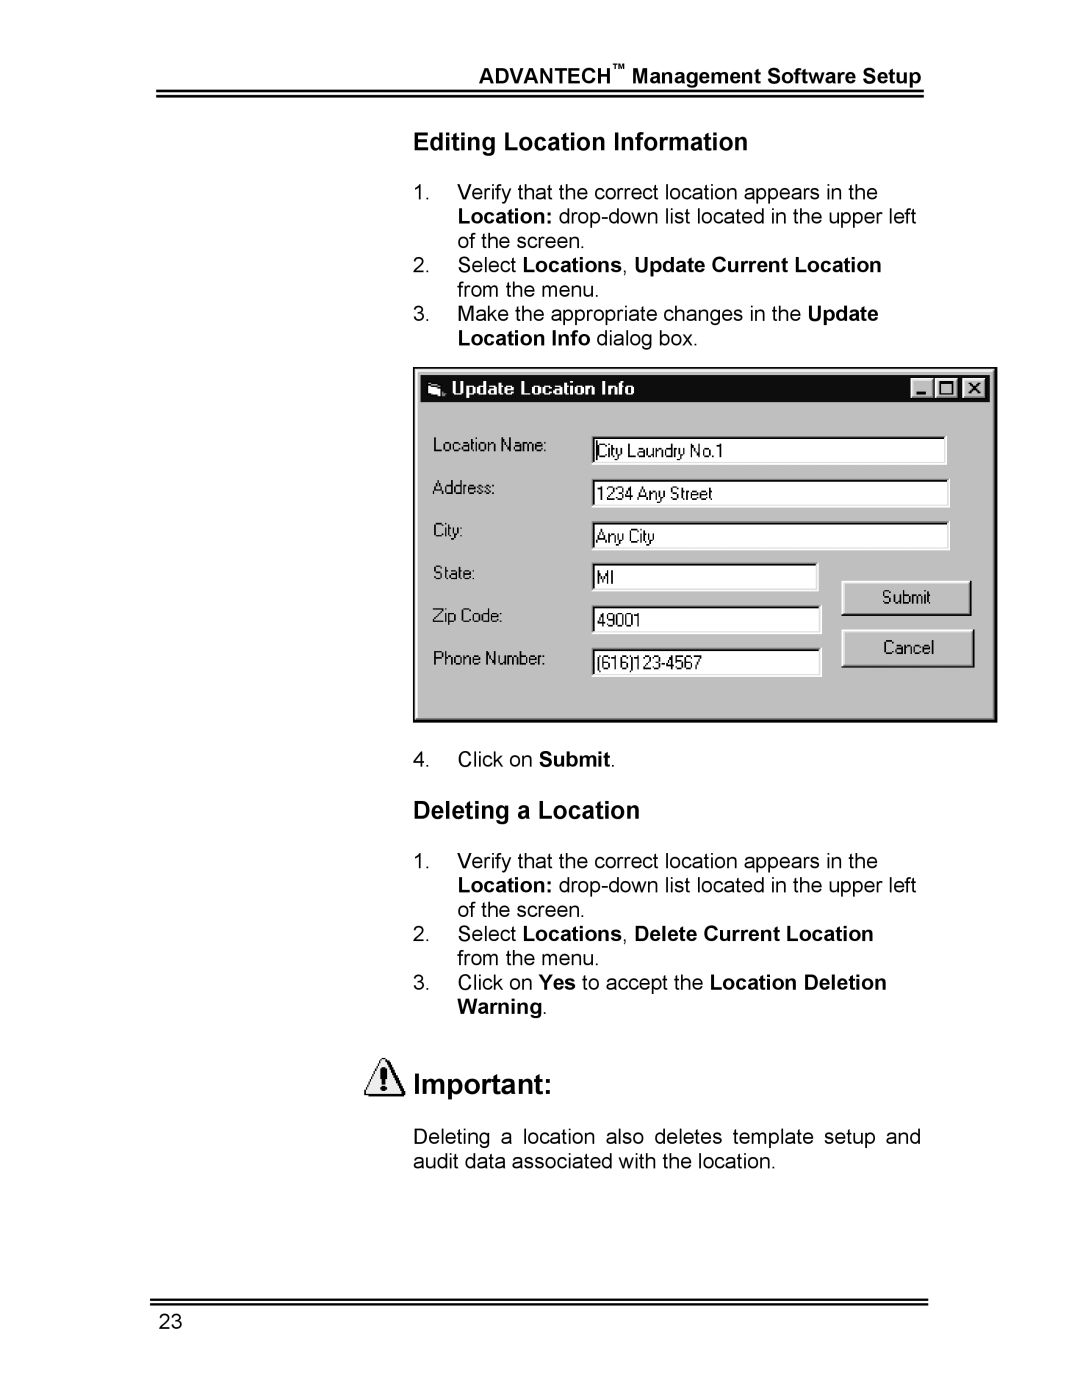 Whirlpool CL-8 user manual Editing Location Information, Deleting a Location 